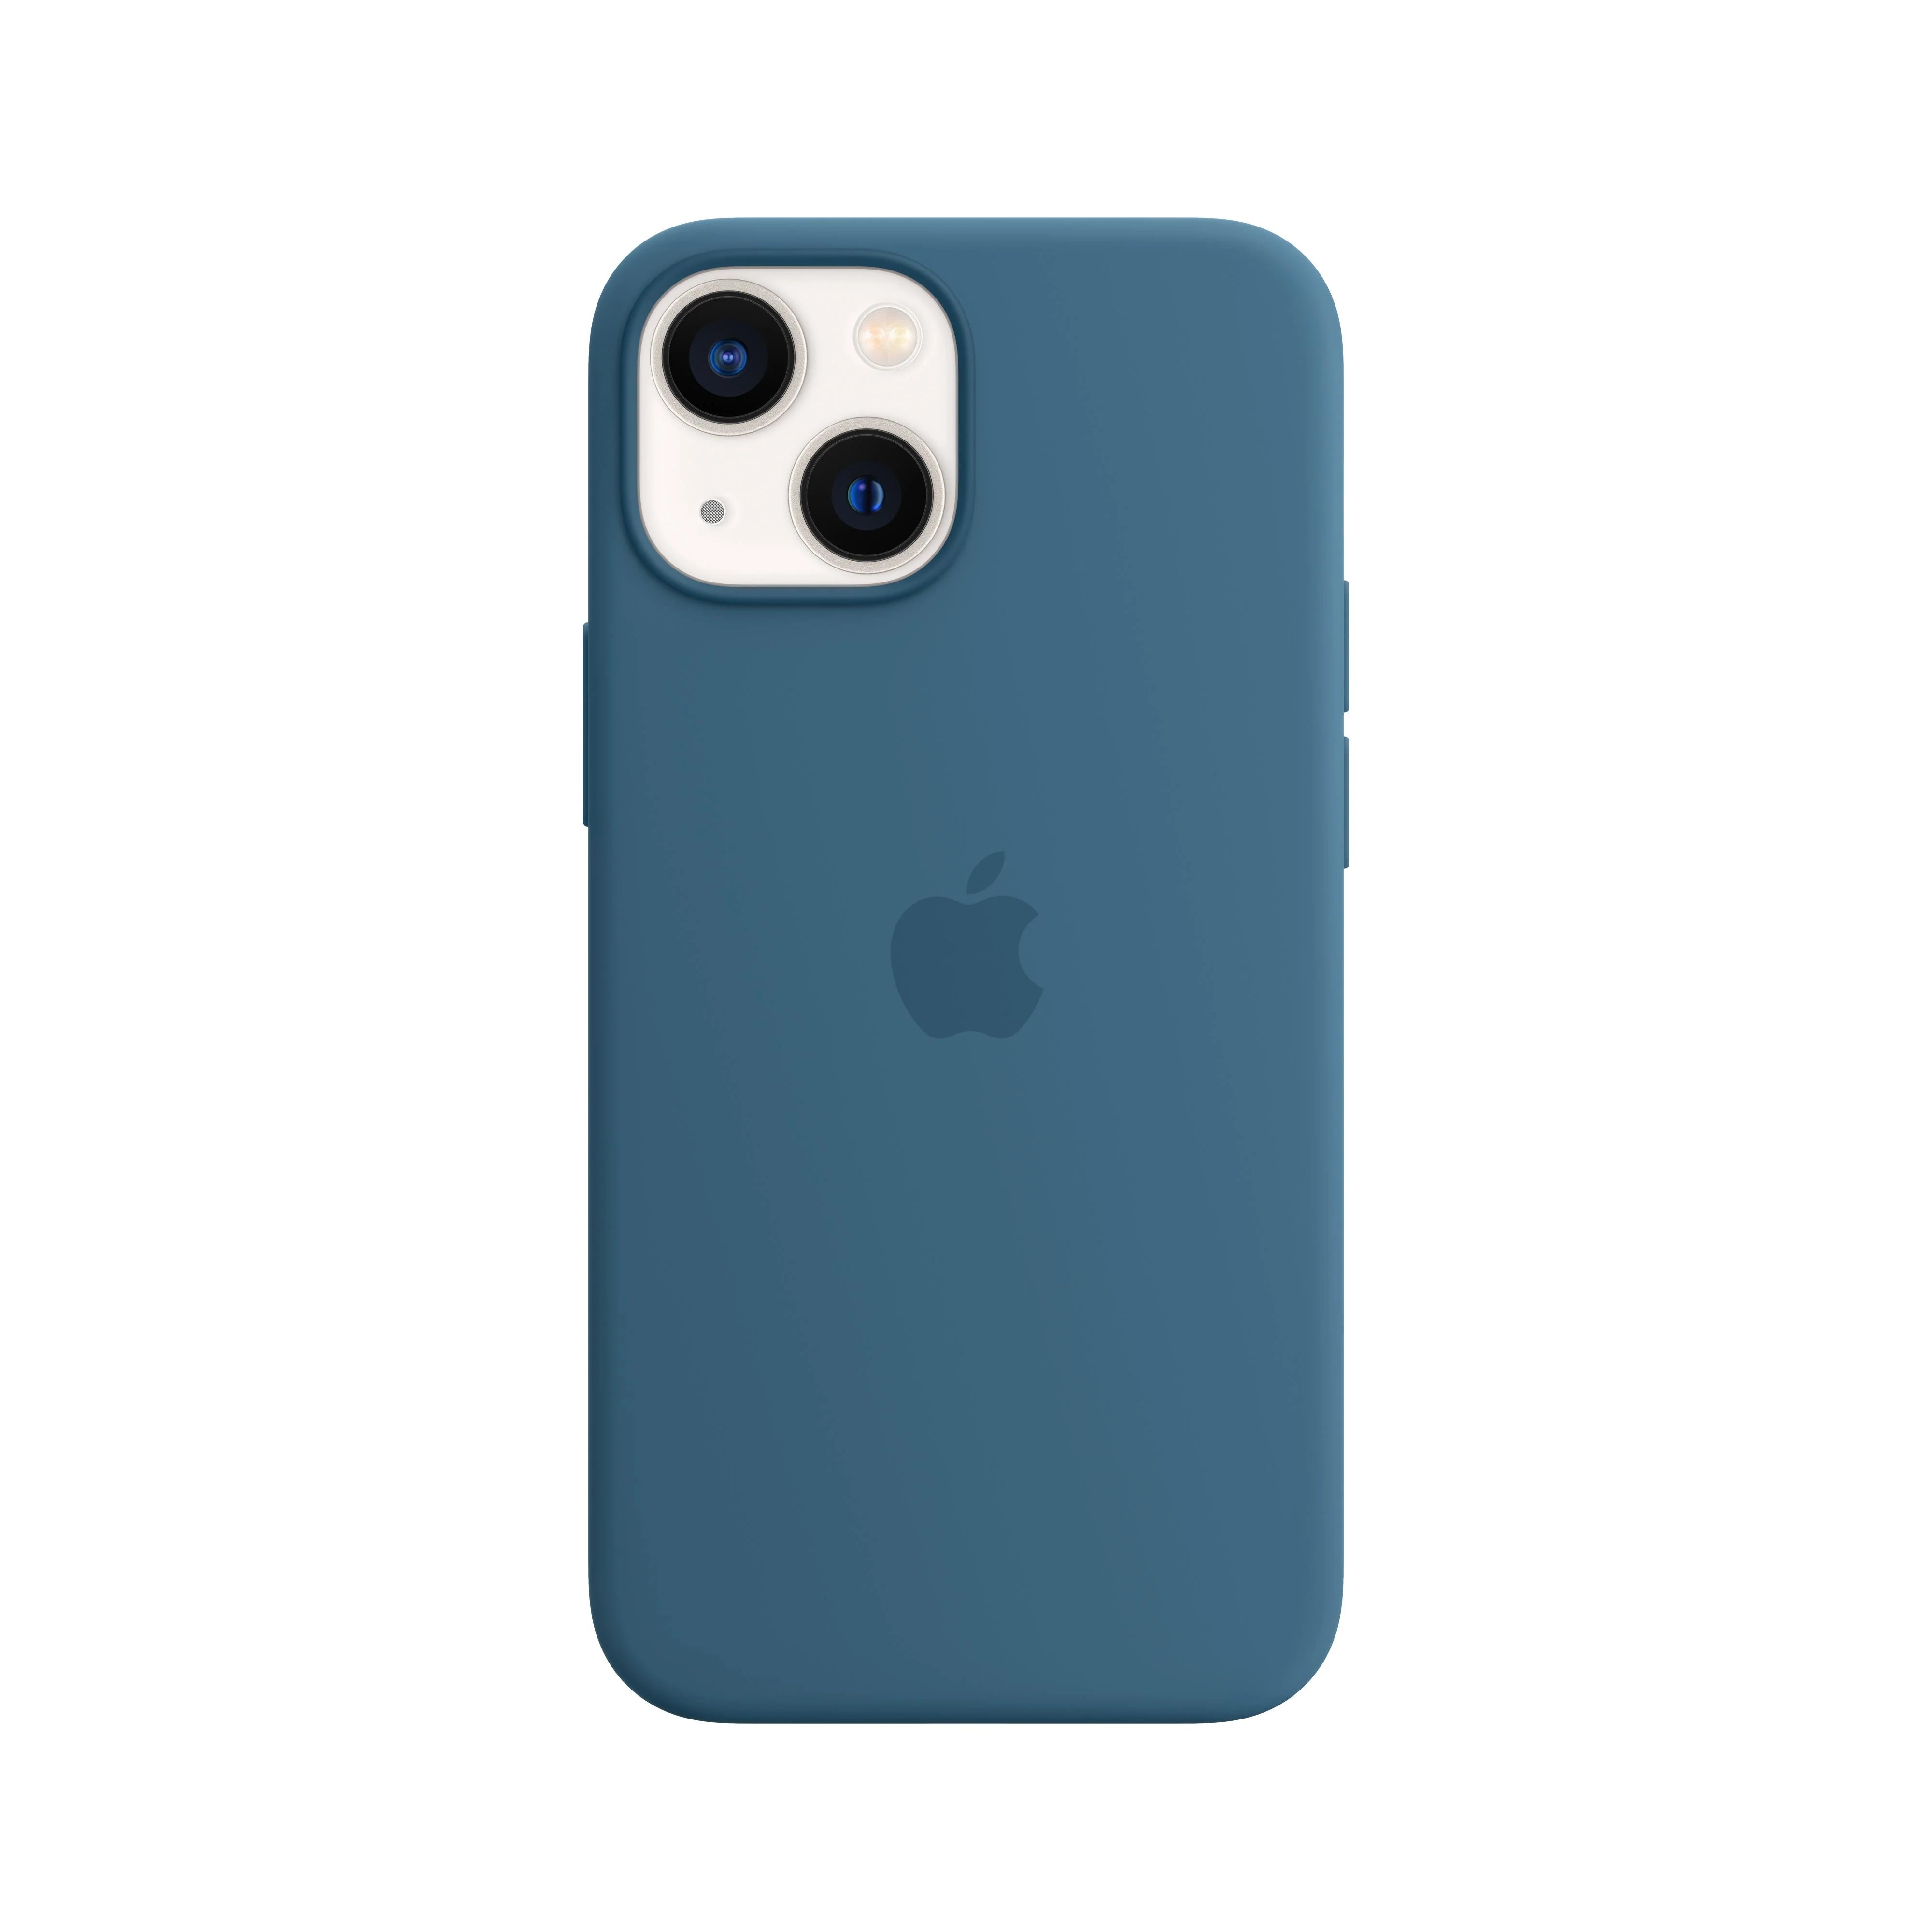 iPhone 12 Mini Silicone Case with MagSafe Support